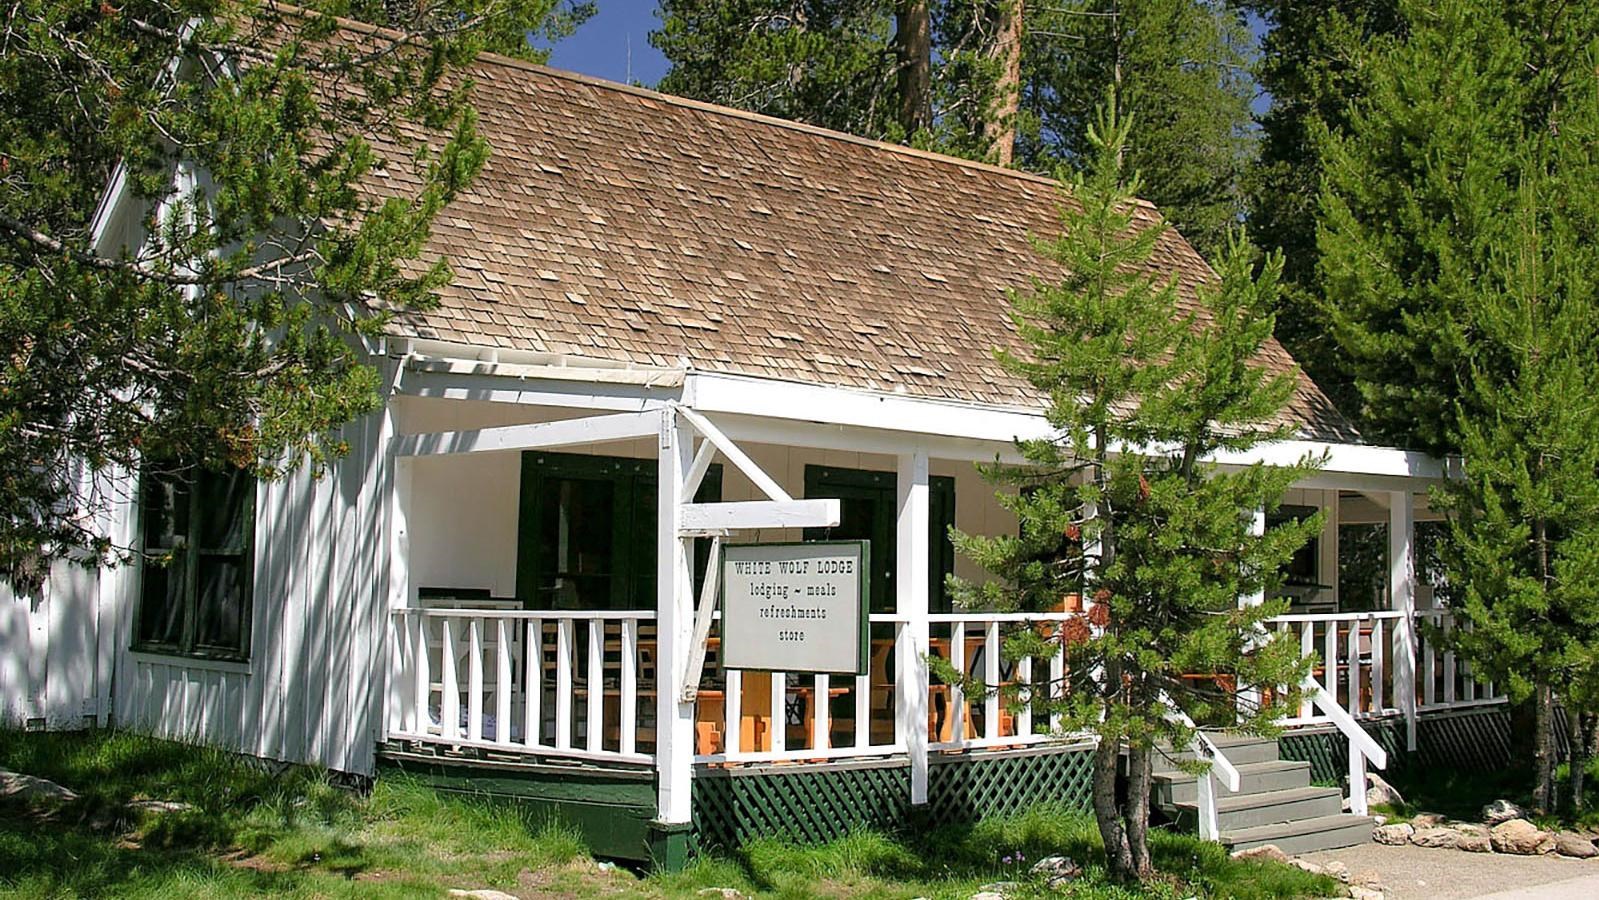 Wooden cabin painted white with a covered porch